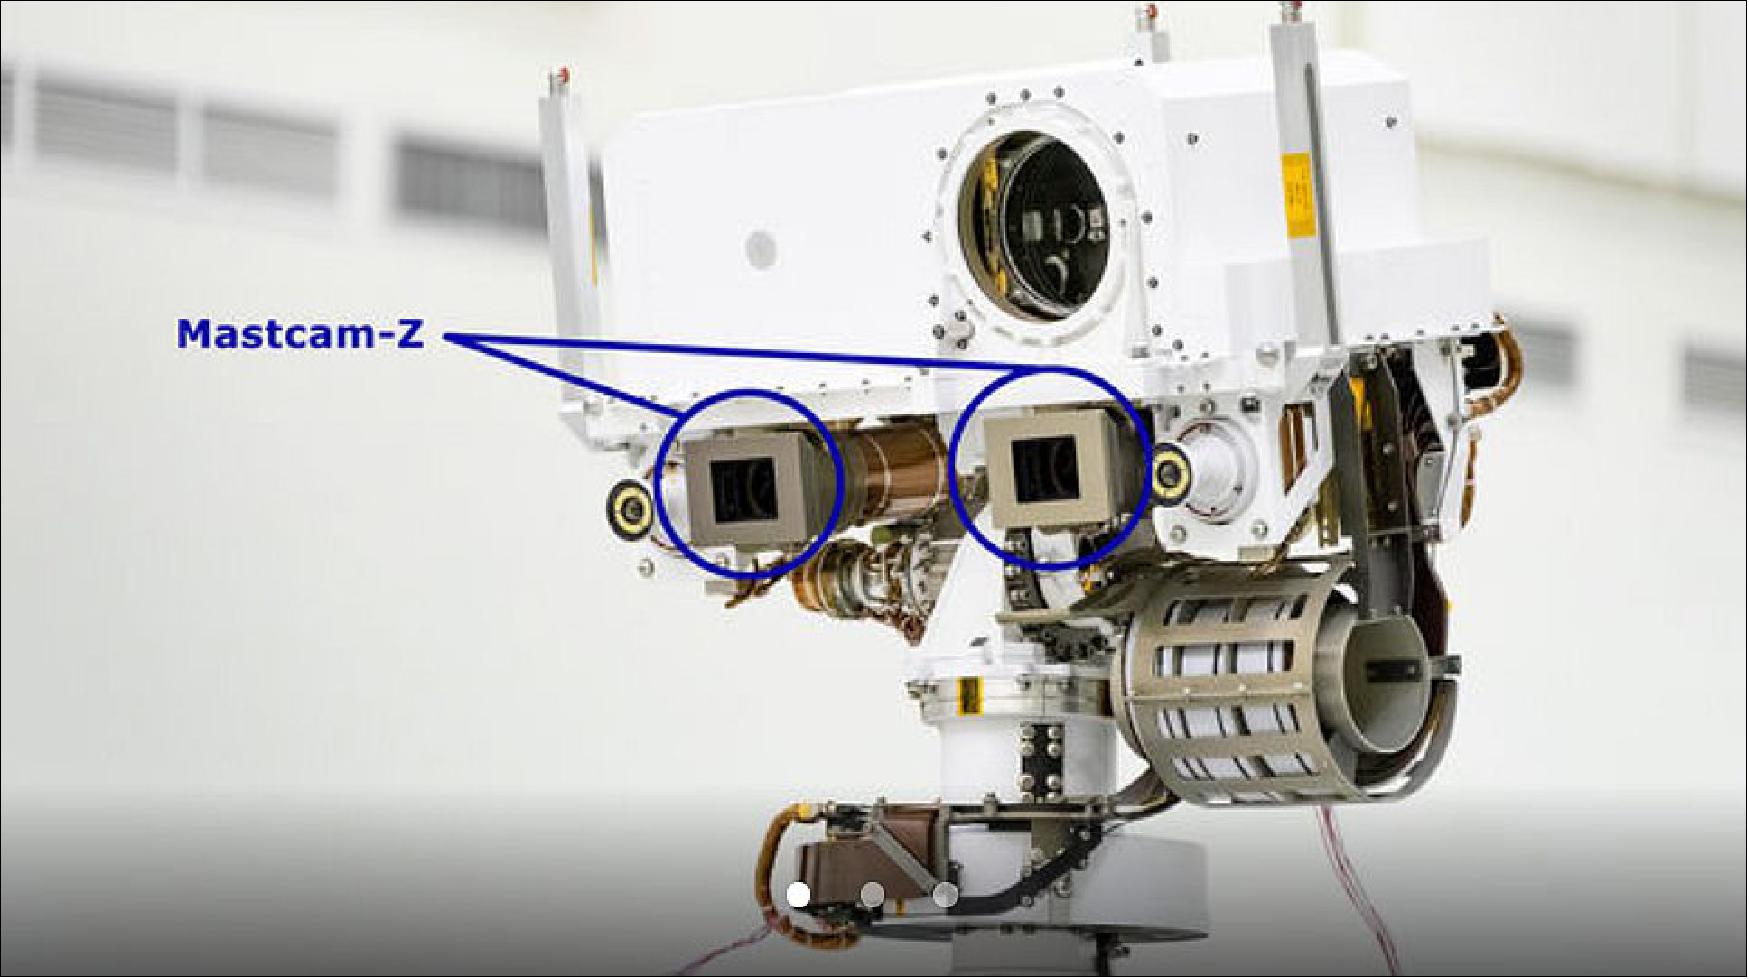 Figure 3: A close-up of the head of Perseverance Rover's remote sensing mast. The mast head contains the SuperCam instrument (its lens is in the large circular opening). In the gray boxes beneath mast head are the two Mastcam-Z imagers. On the exterior sides of those imagers are the rover's two navigation cameras (image credit: NASA/JPL-Caltech)